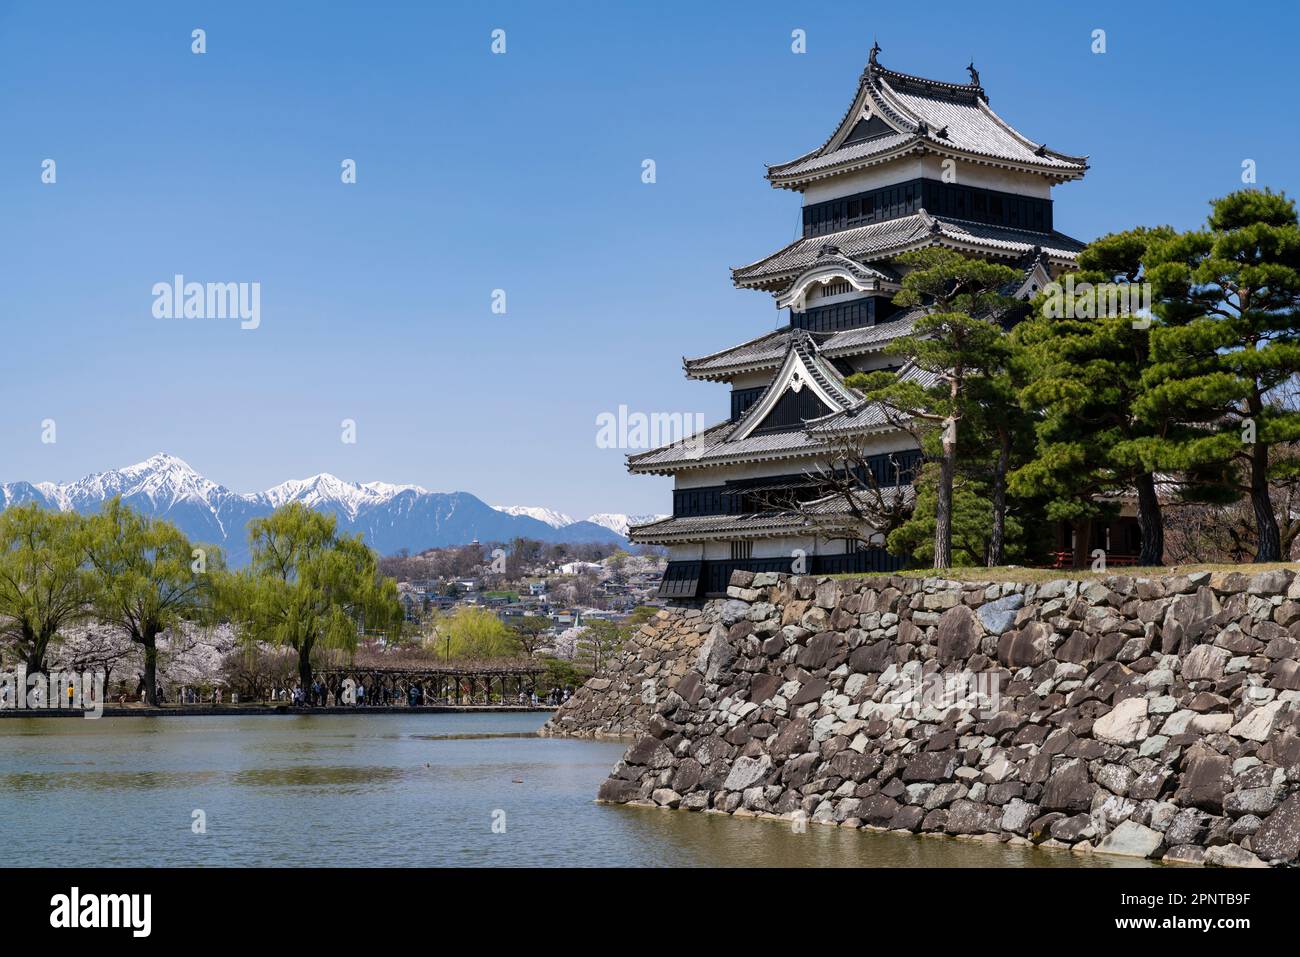 Matsumoto Castle and mountains of the Japanese Alps in Nagano Prefecture, Japan. Stock Photo